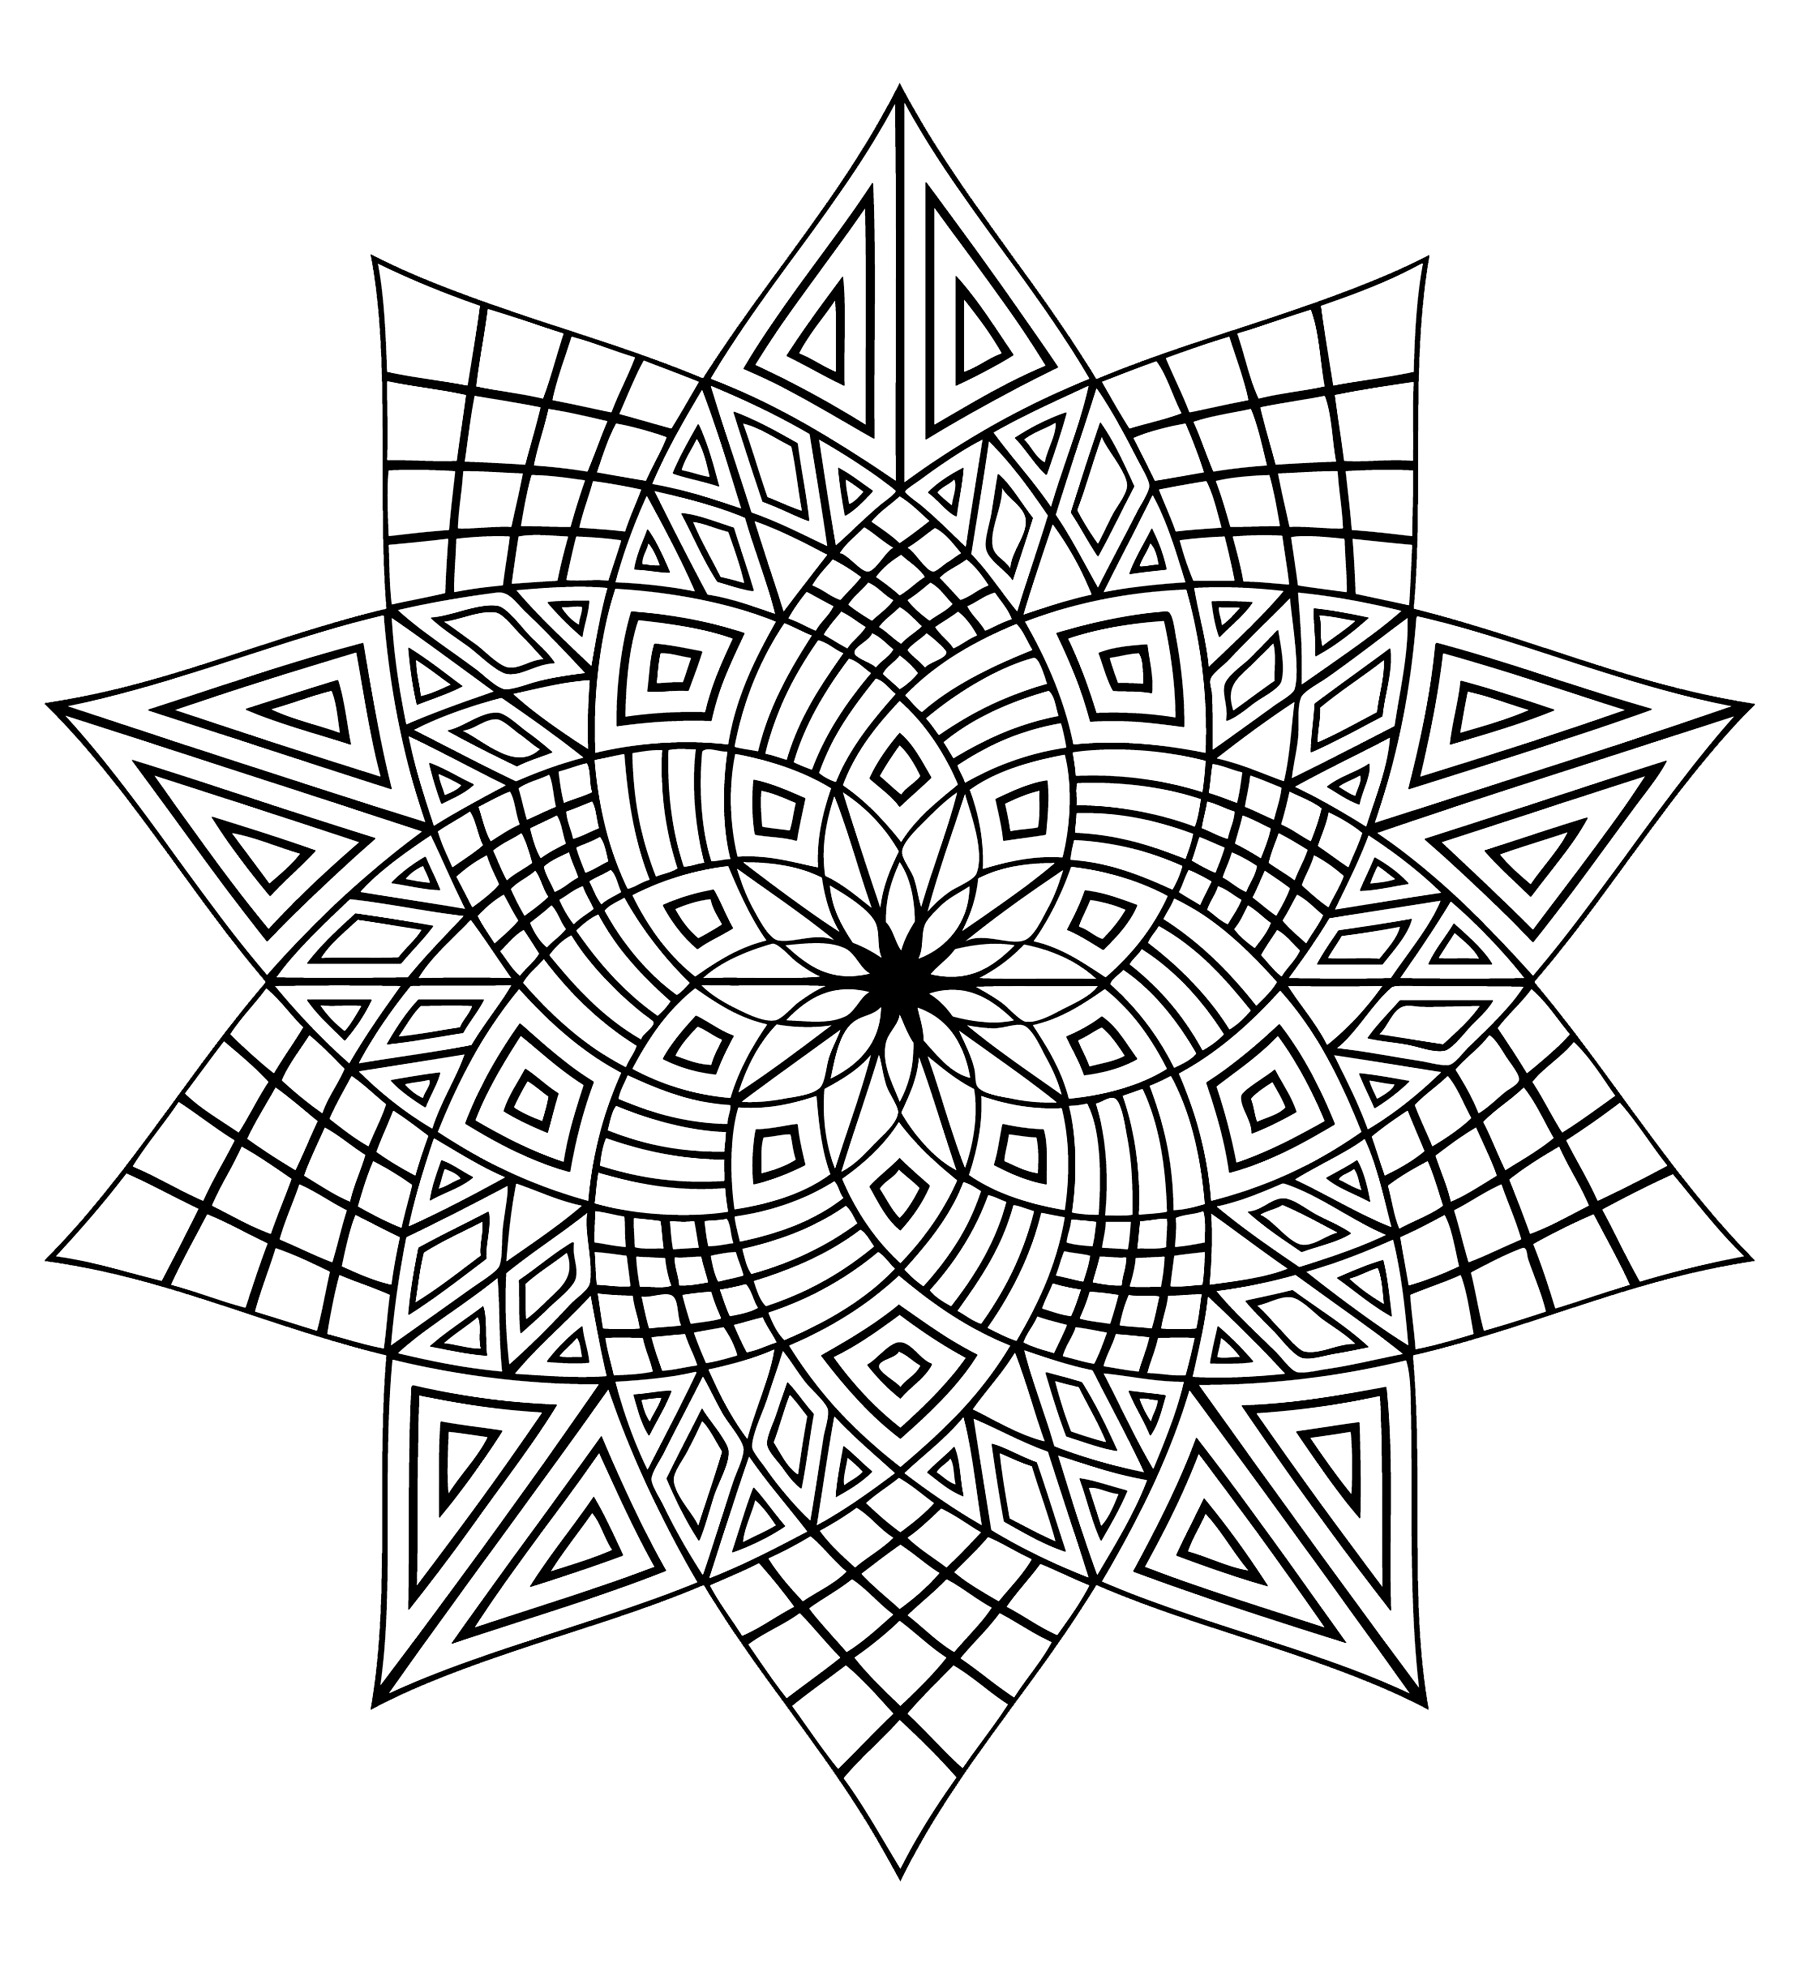 A Mandala drawing forming a star, with various different patterns inside